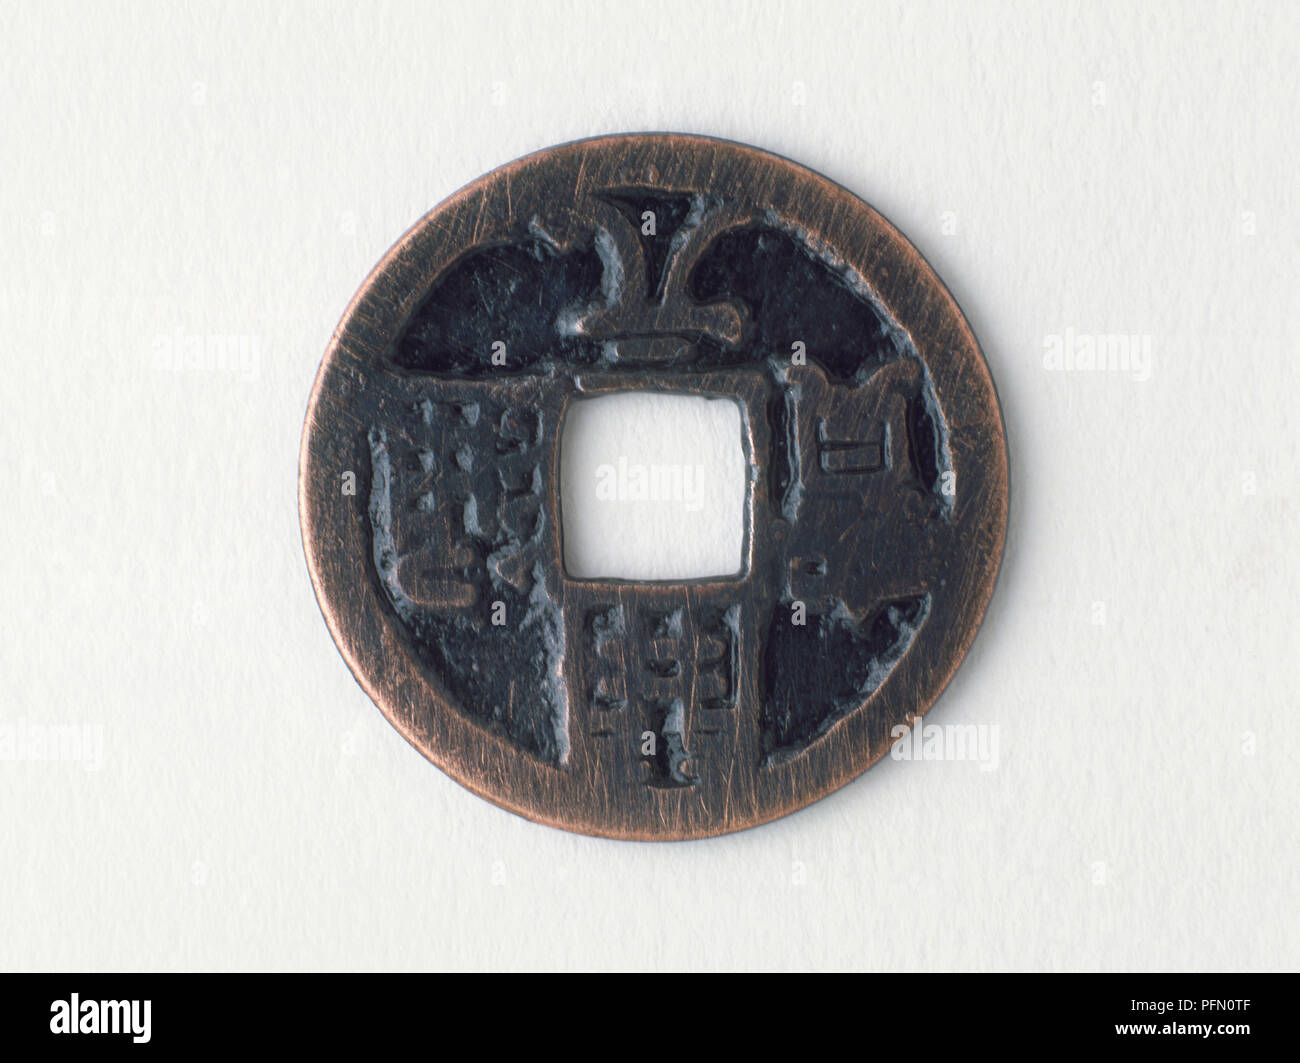 I Ching coin Stock Photo